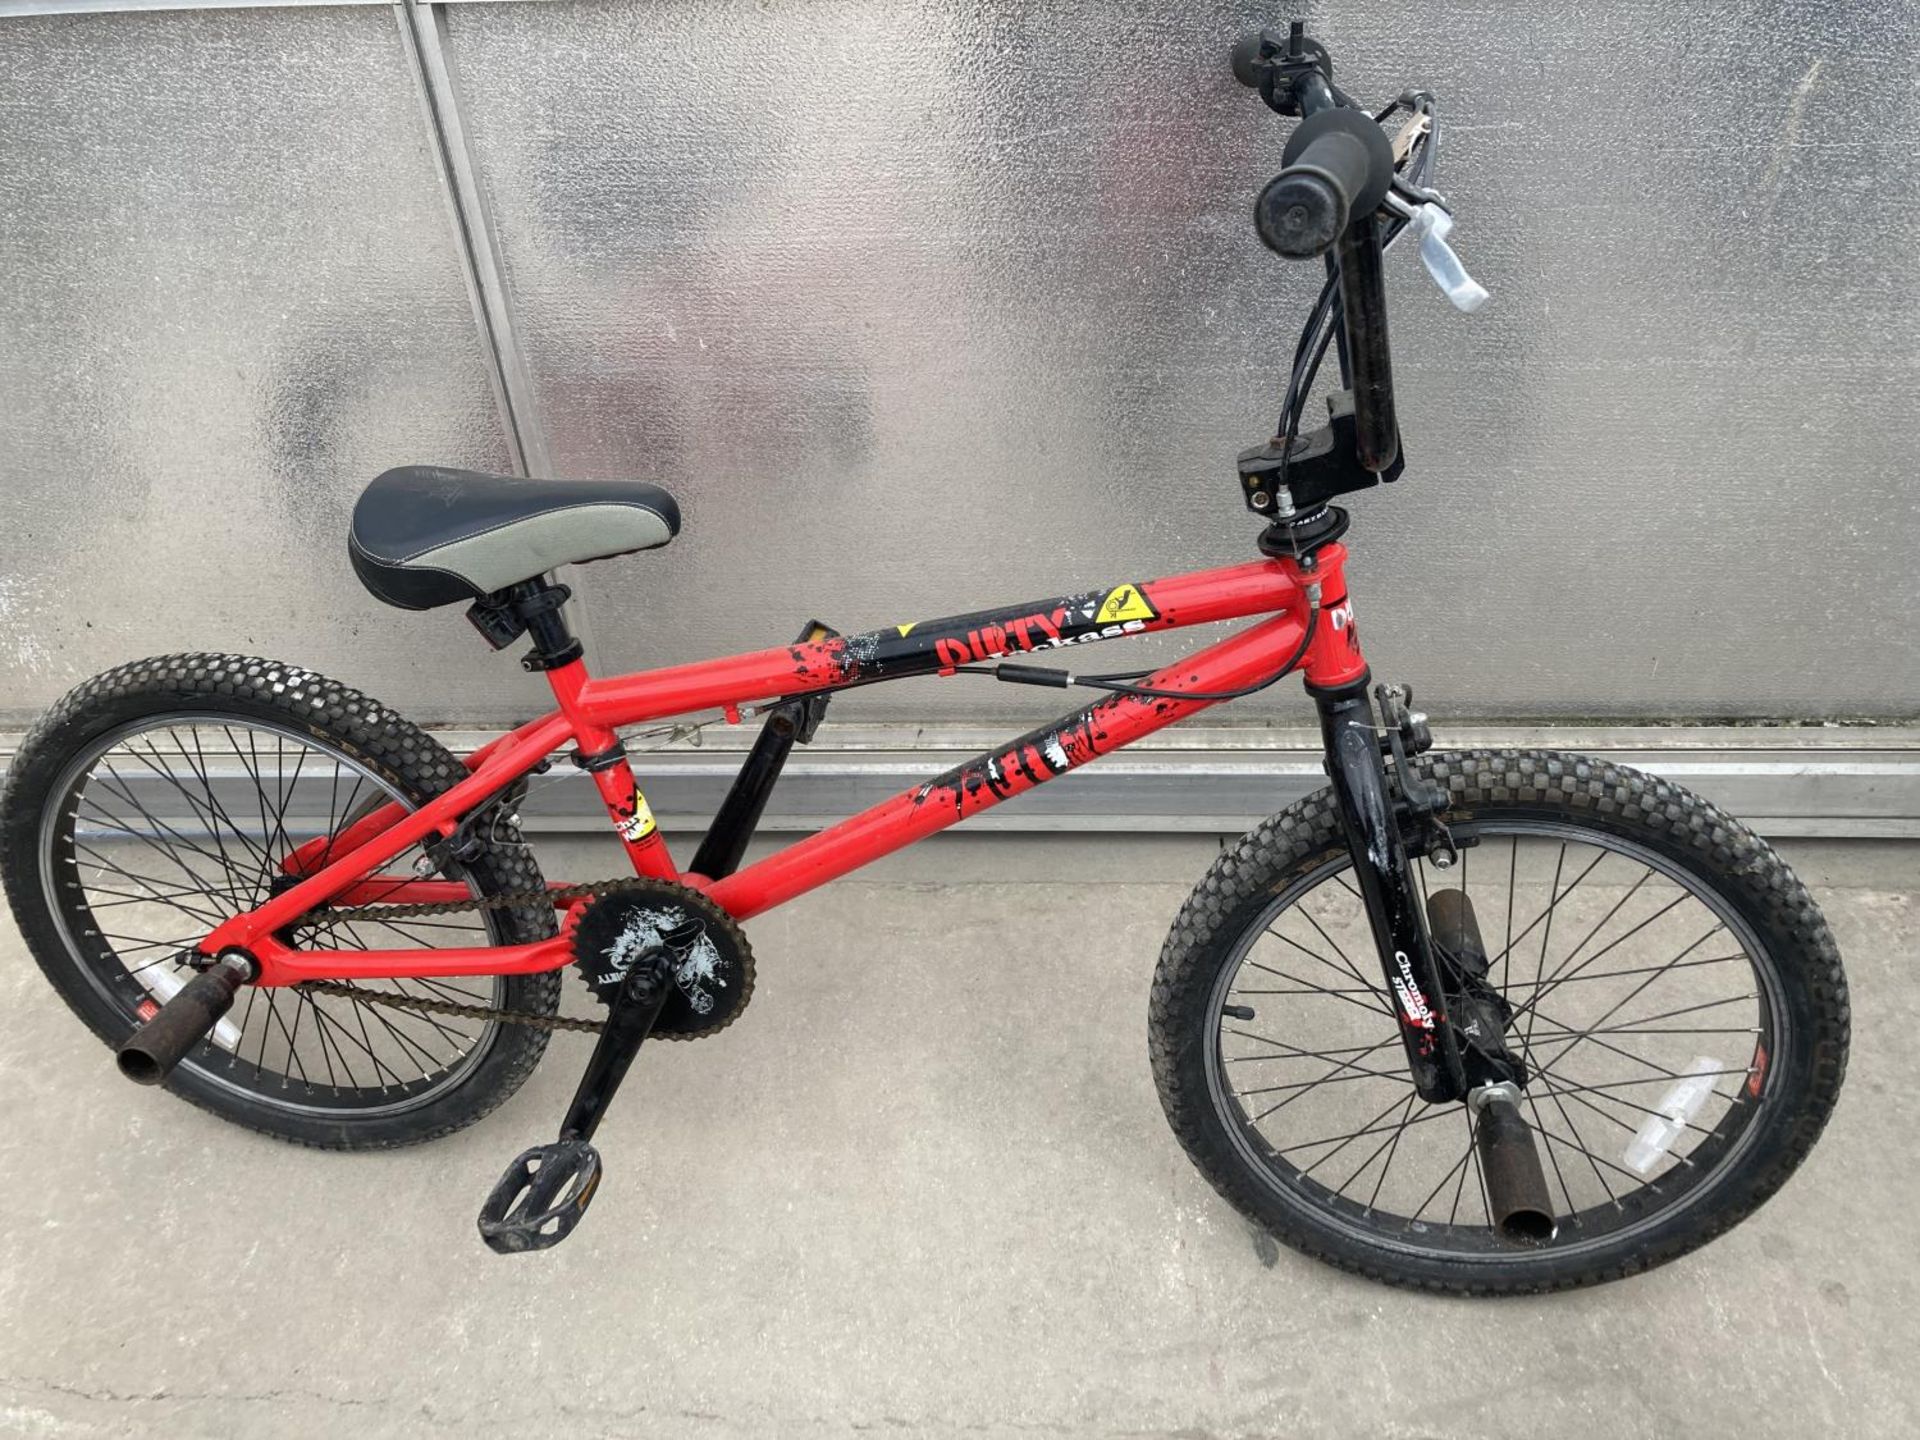 A DIRTY BMX BIKE WITH FRONT AND REAR STUNT PEGS